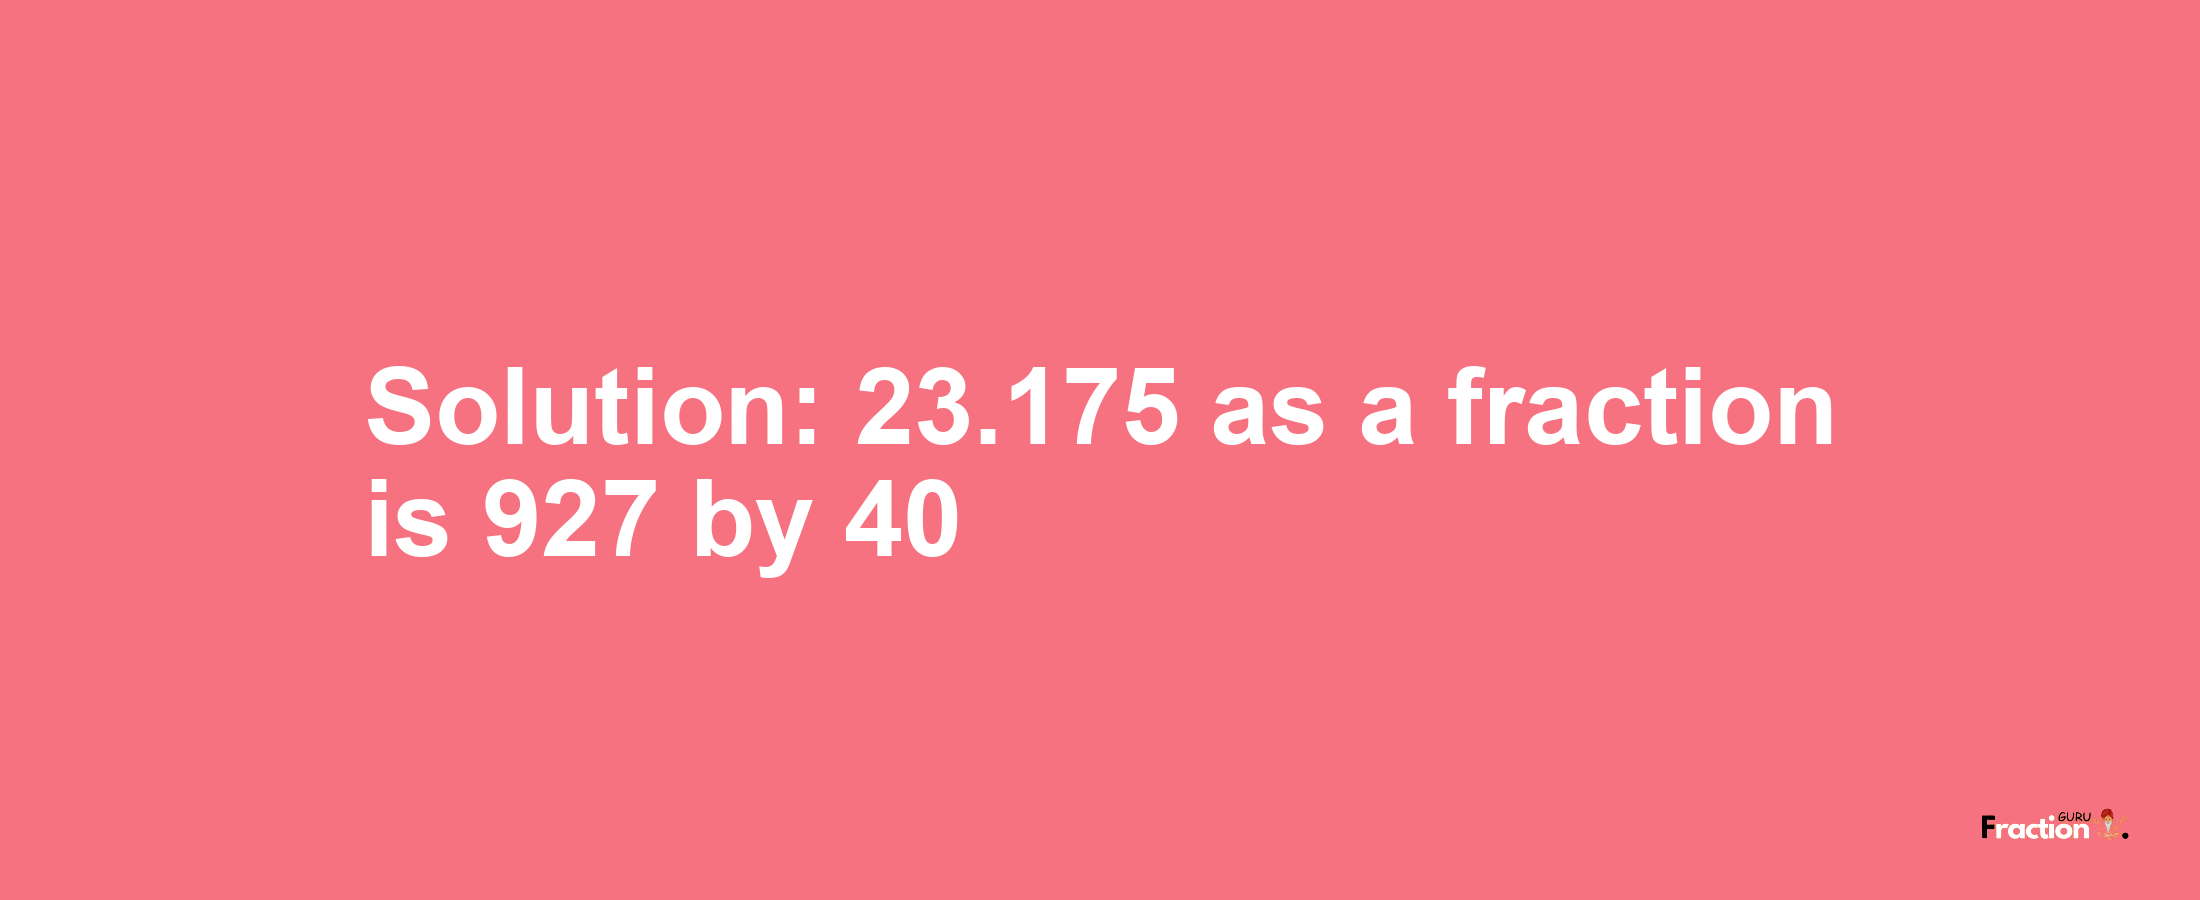 Solution:23.175 as a fraction is 927/40